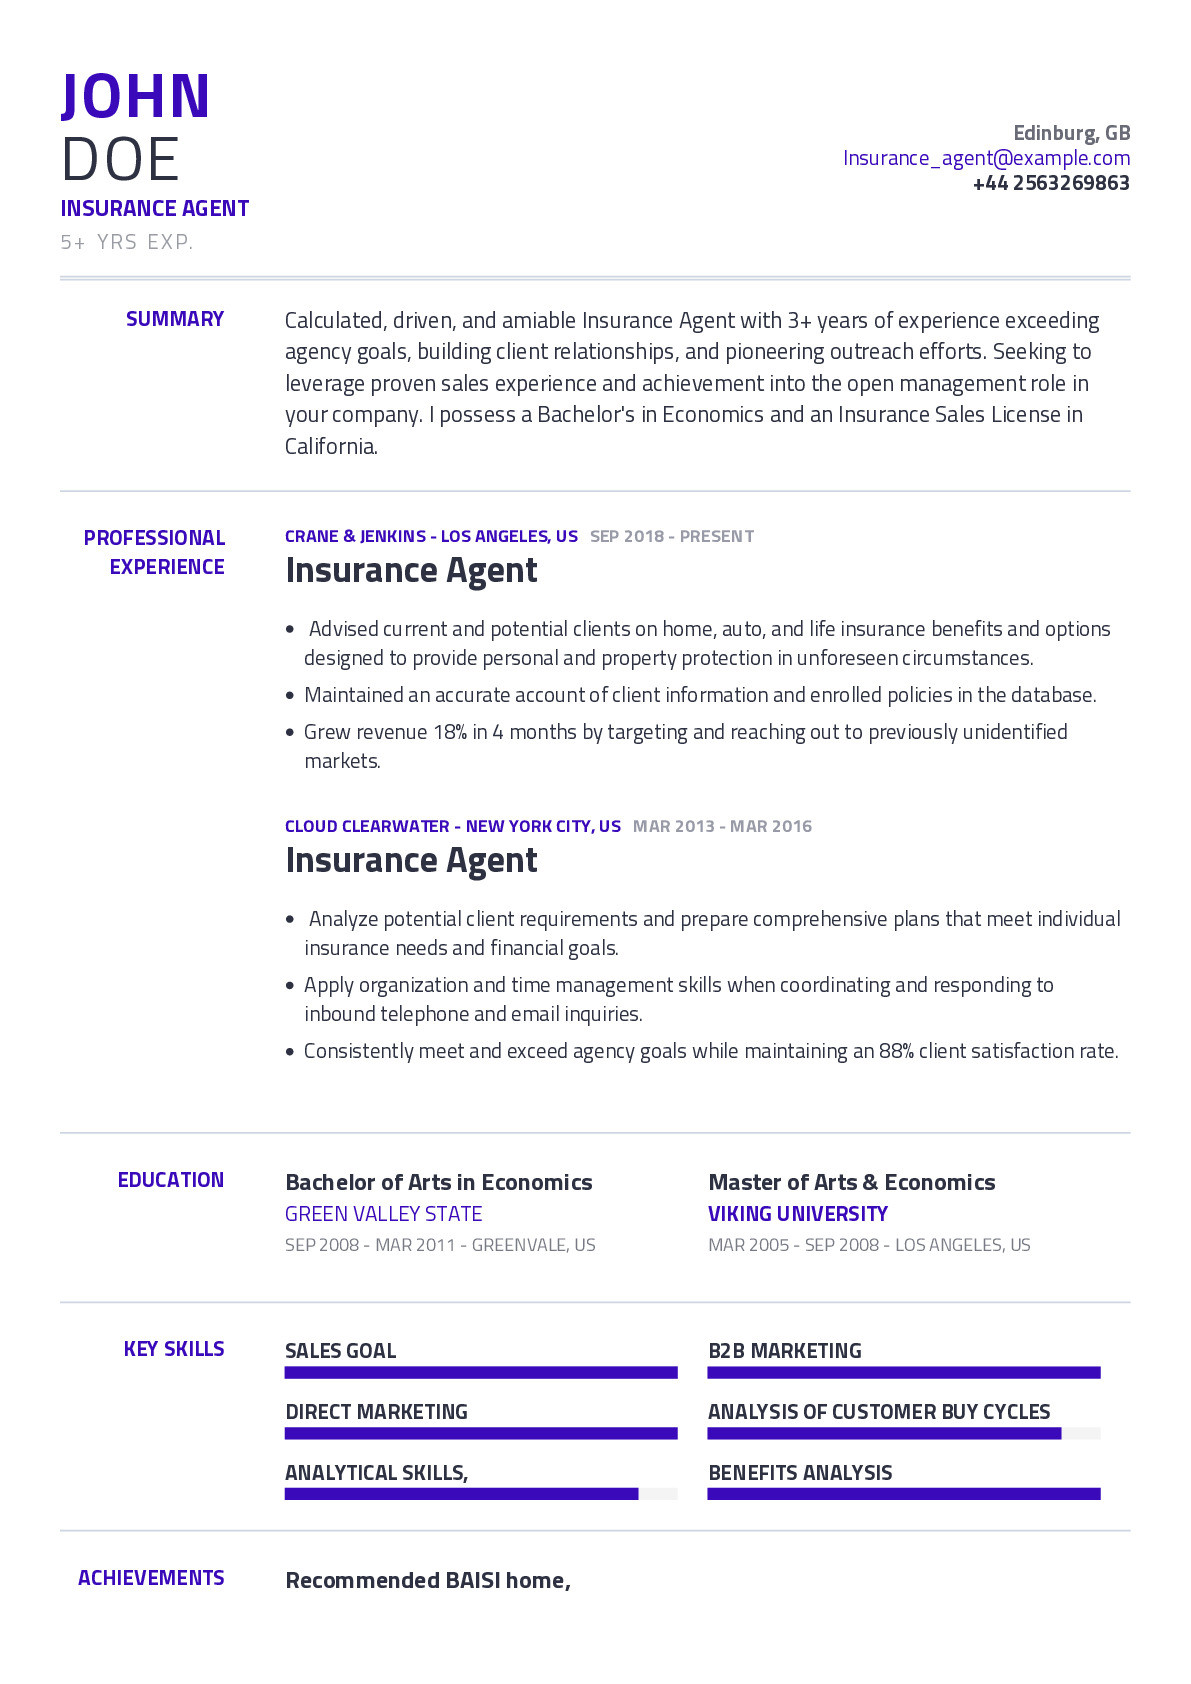 Templates for Insurance Sales Resume Sample Insurance Agent Resume Example with Content Sample Craftmycv